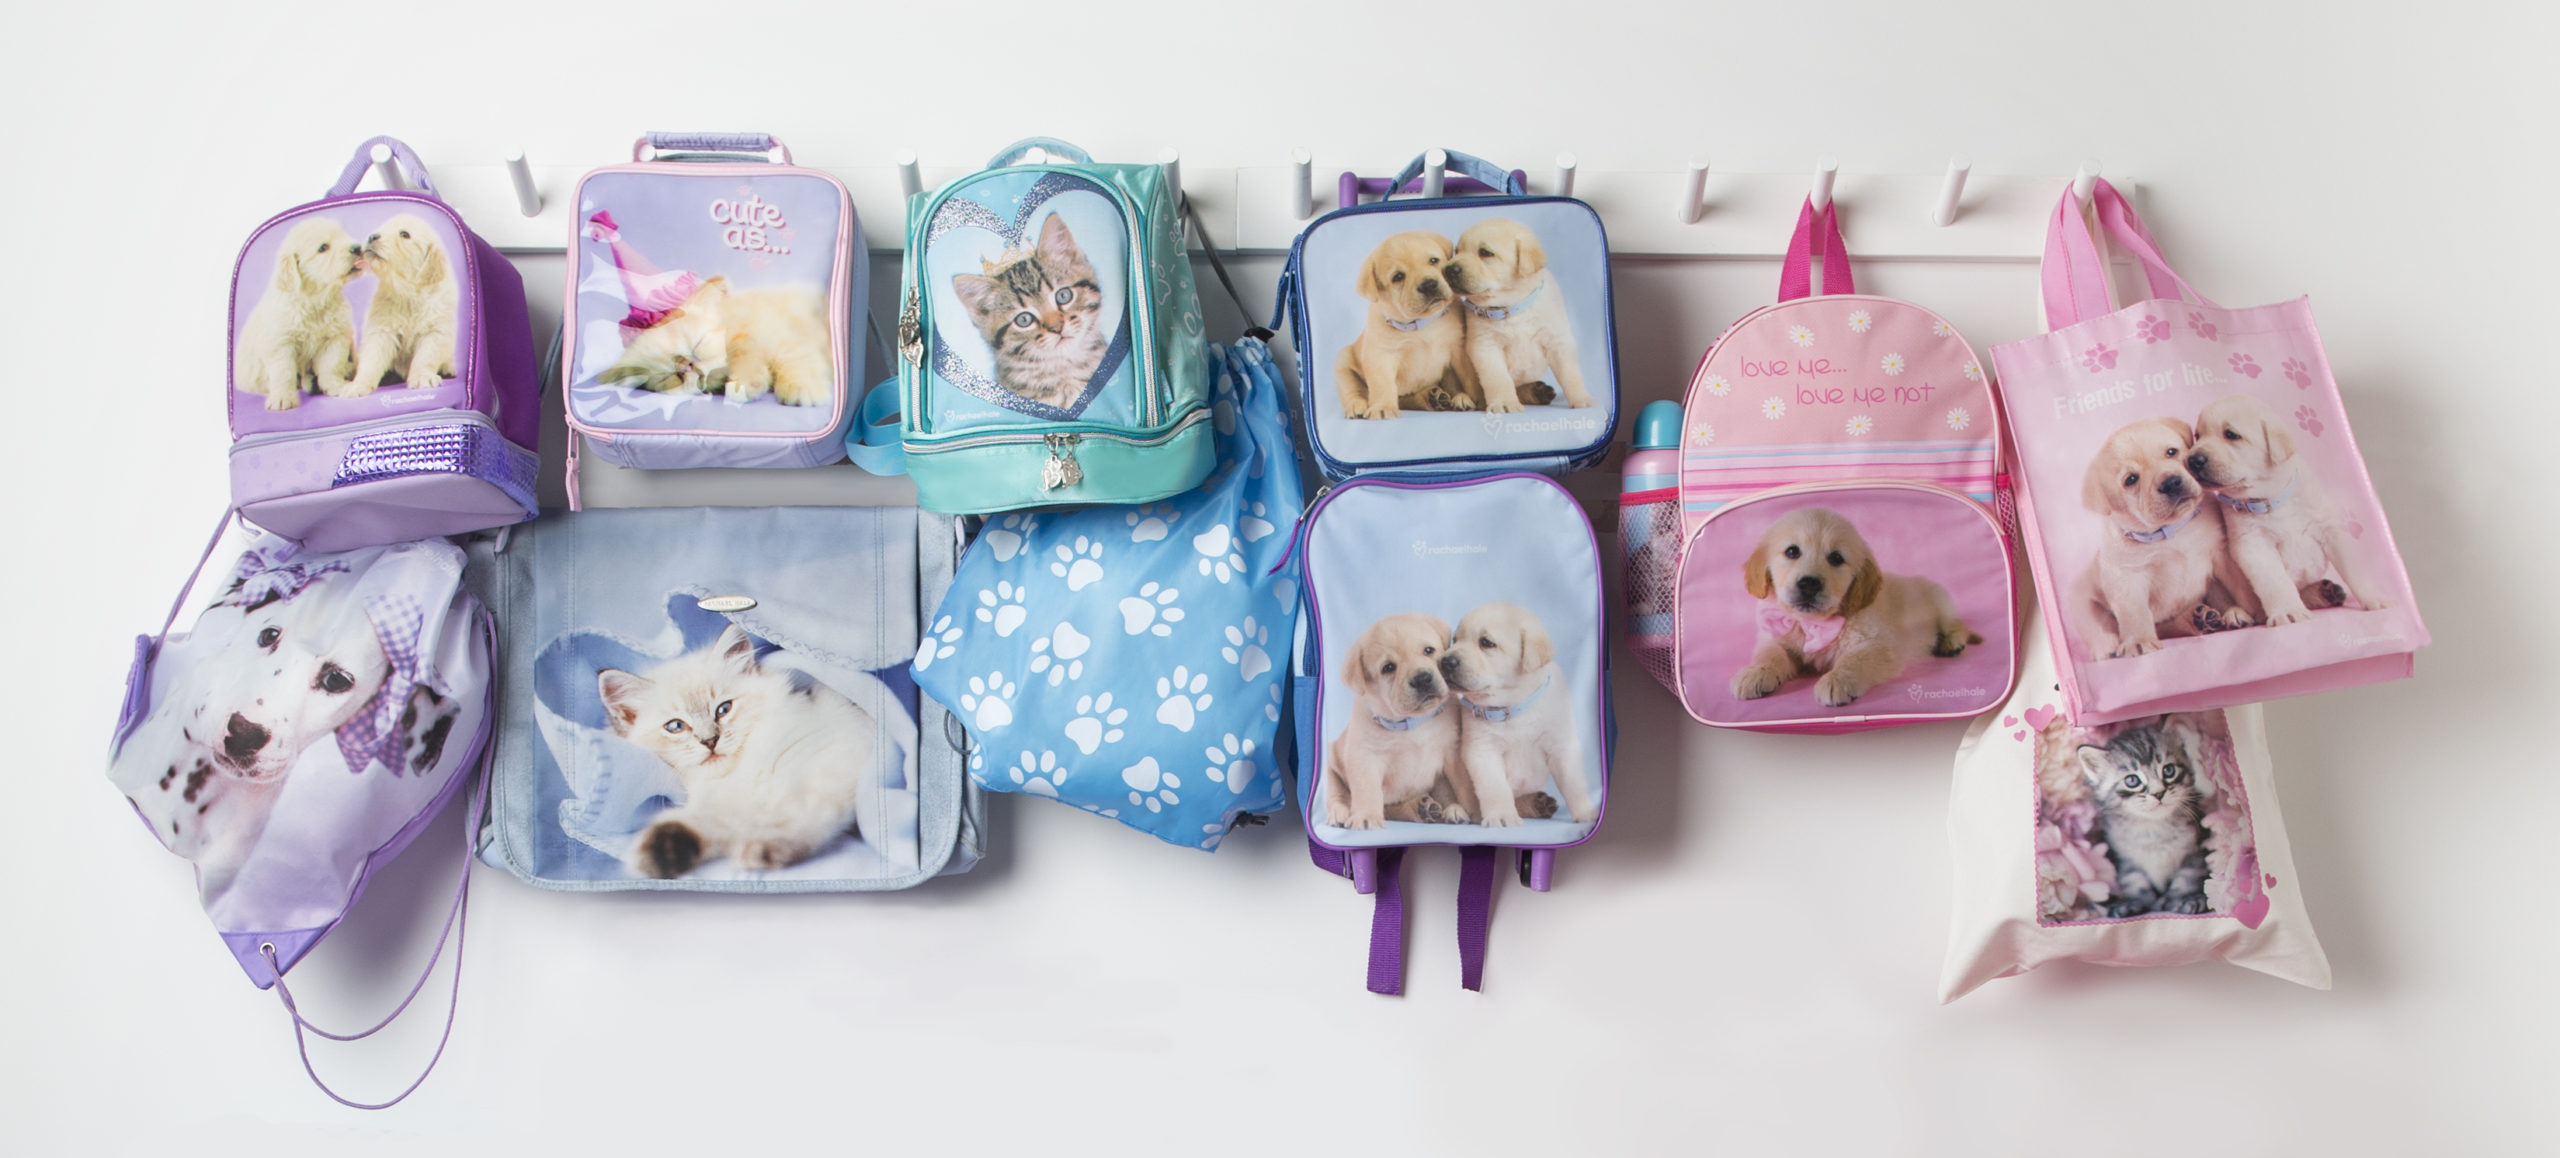 Rachael Hale backpacks and lunchboxes